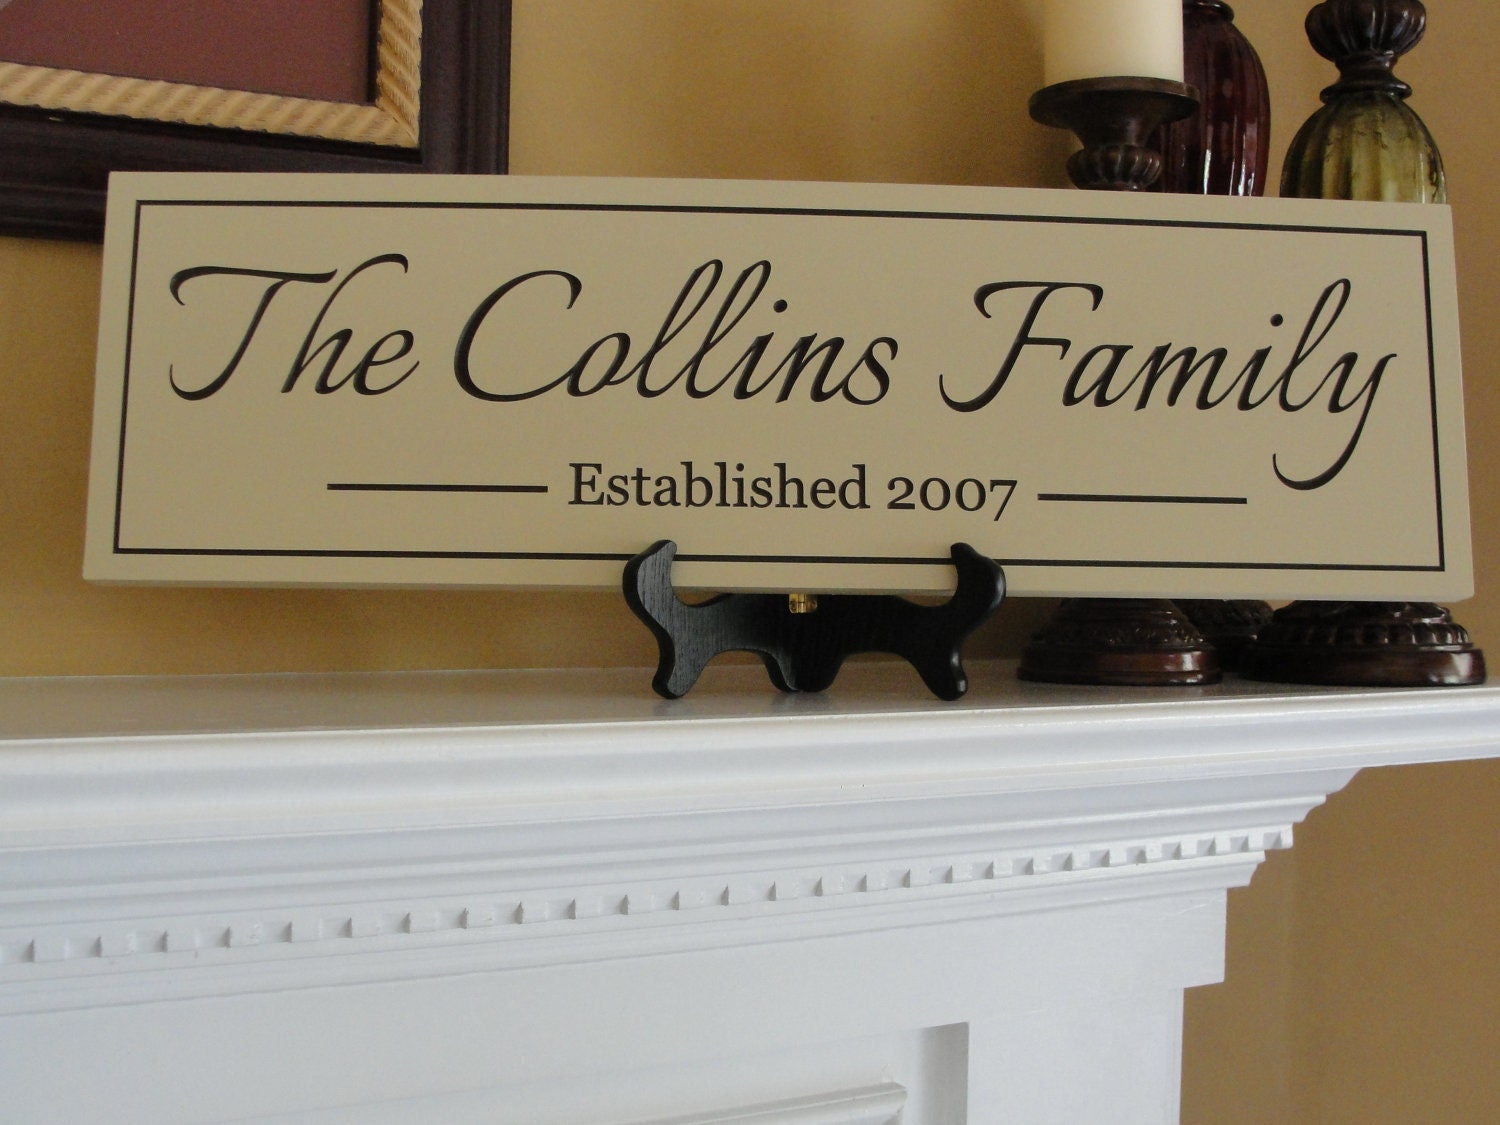 signs for family